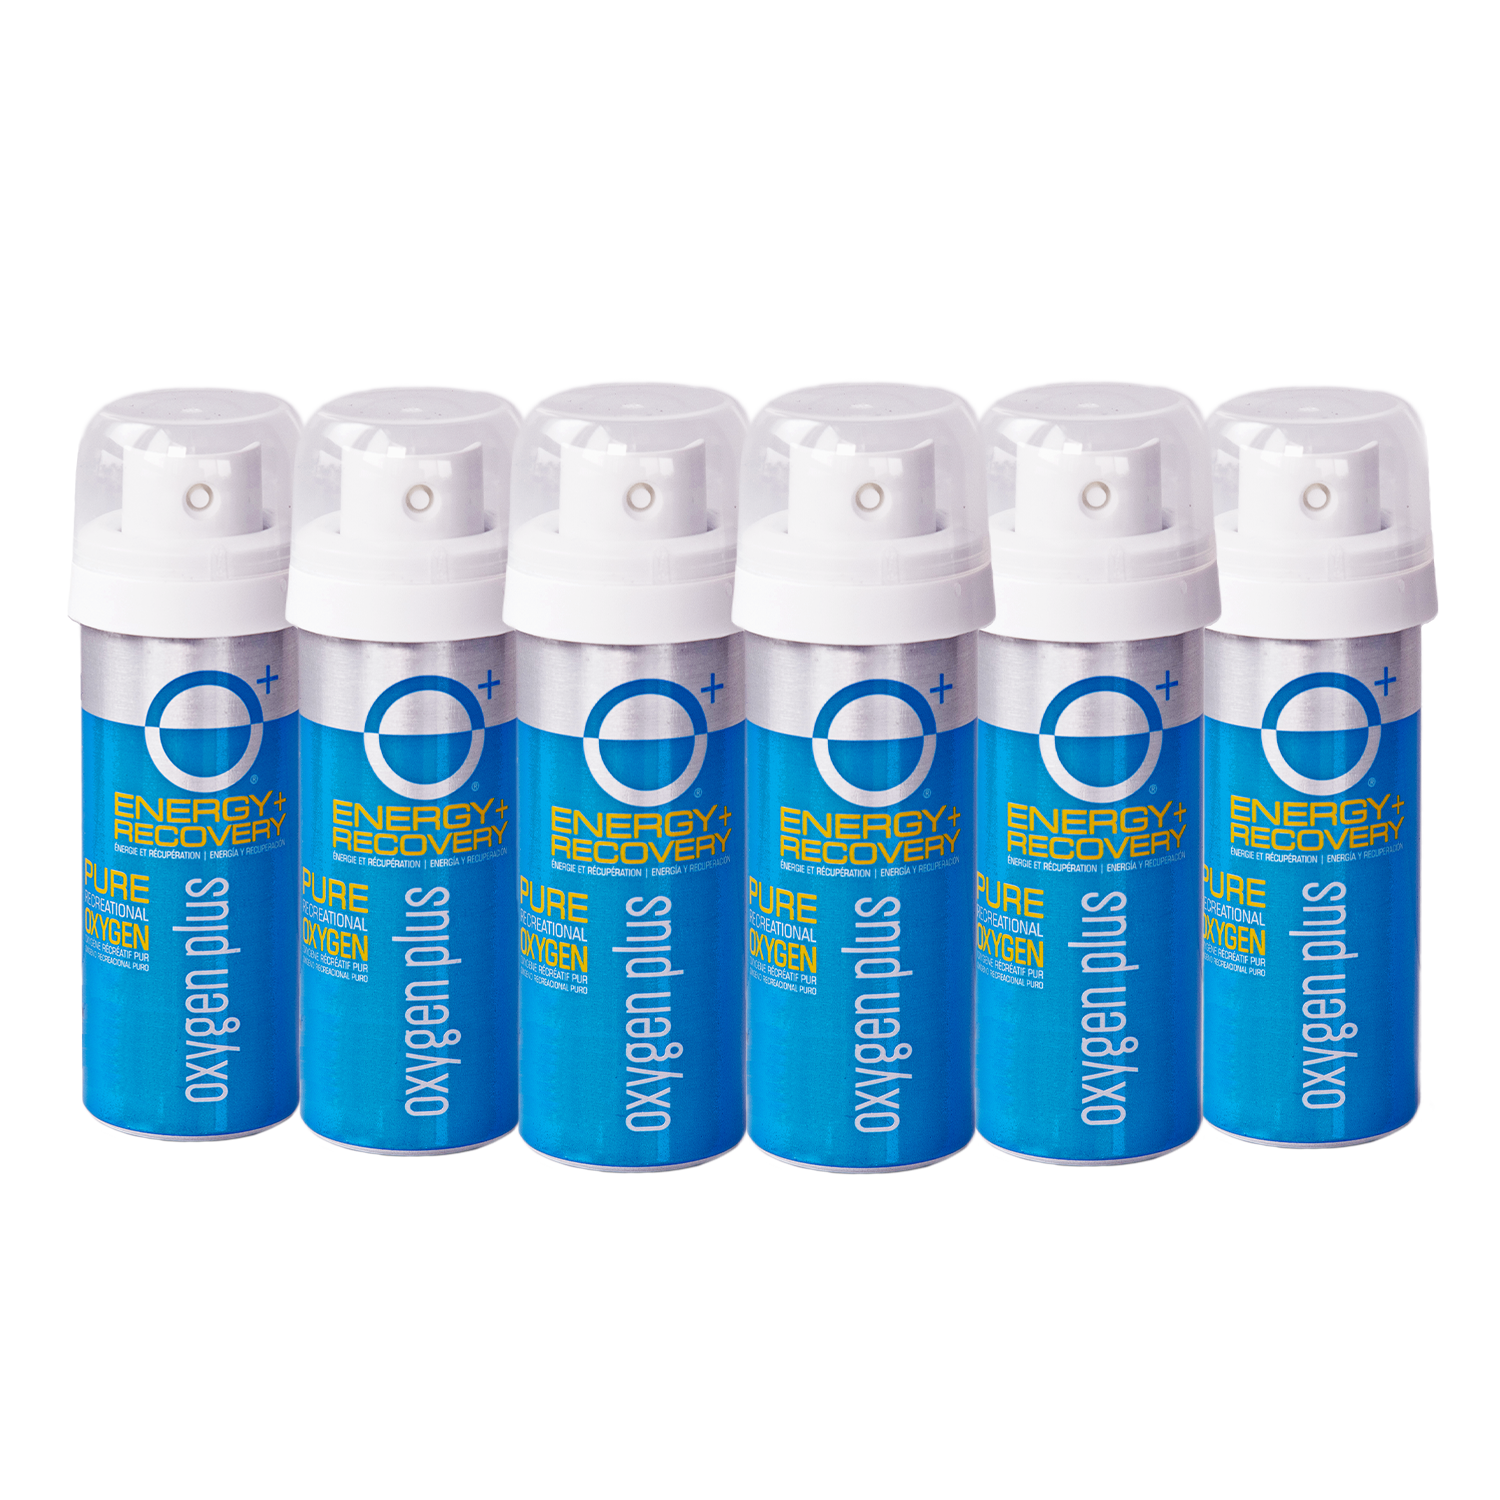 O+ canned oxygen mini 6-pack